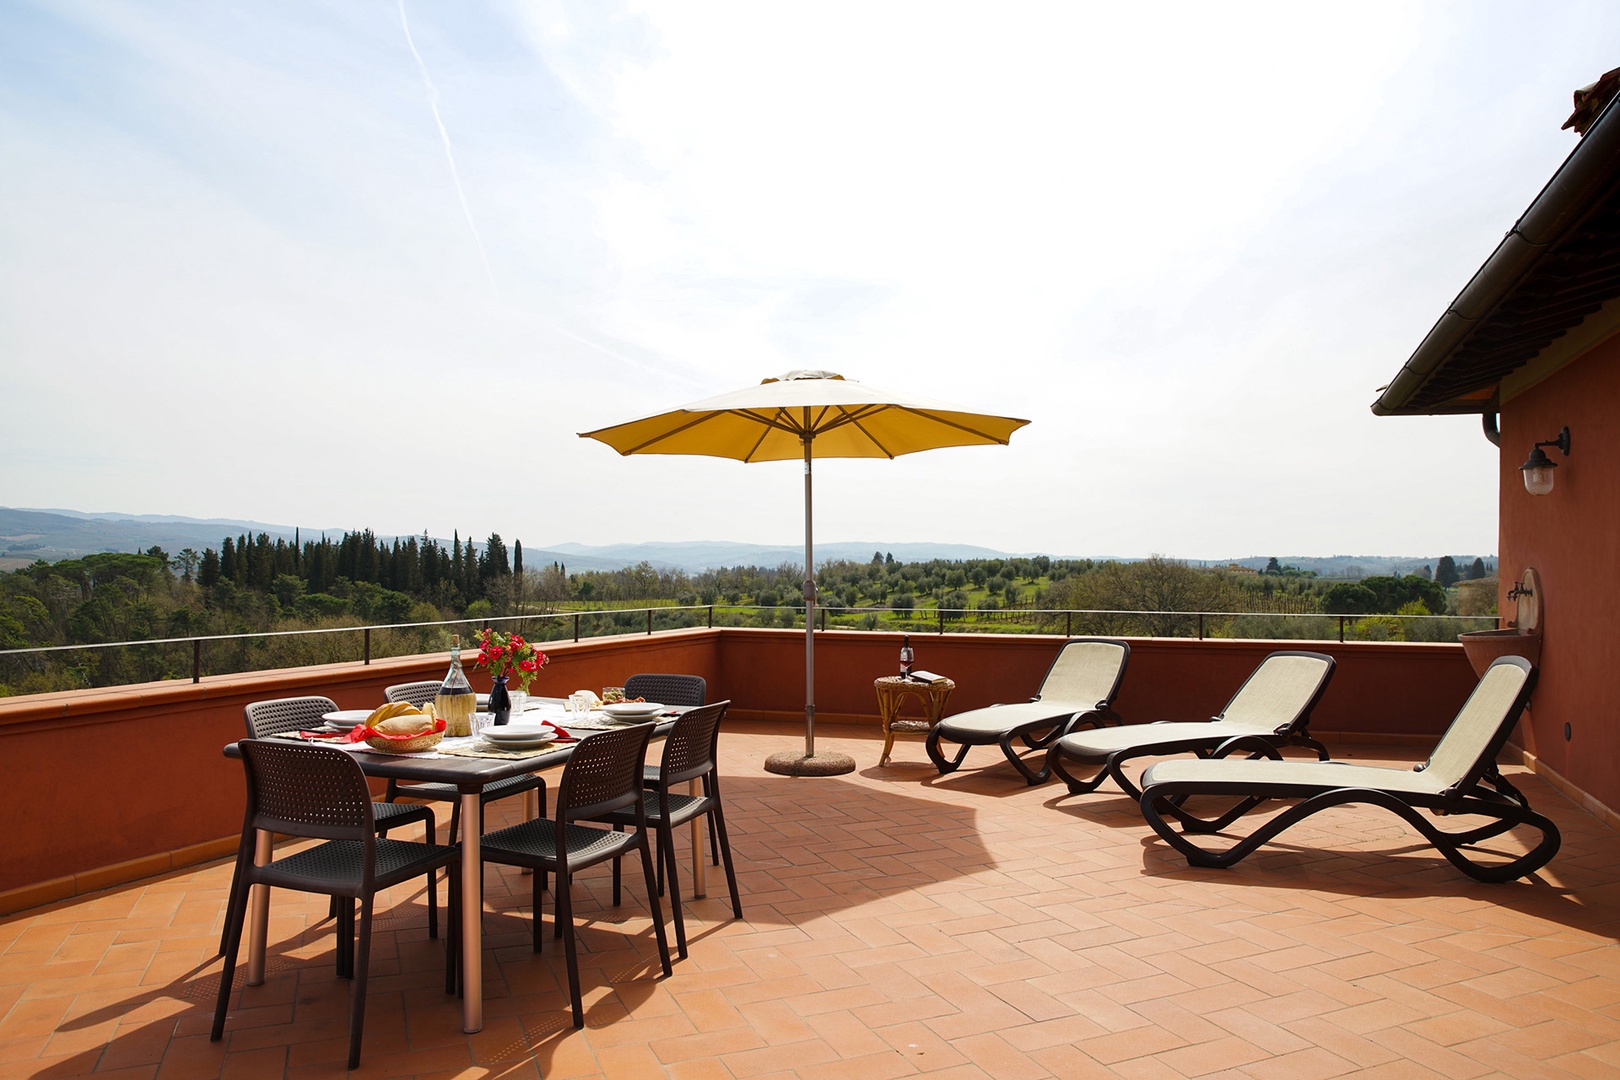 Relax on the large terrace with views galore.